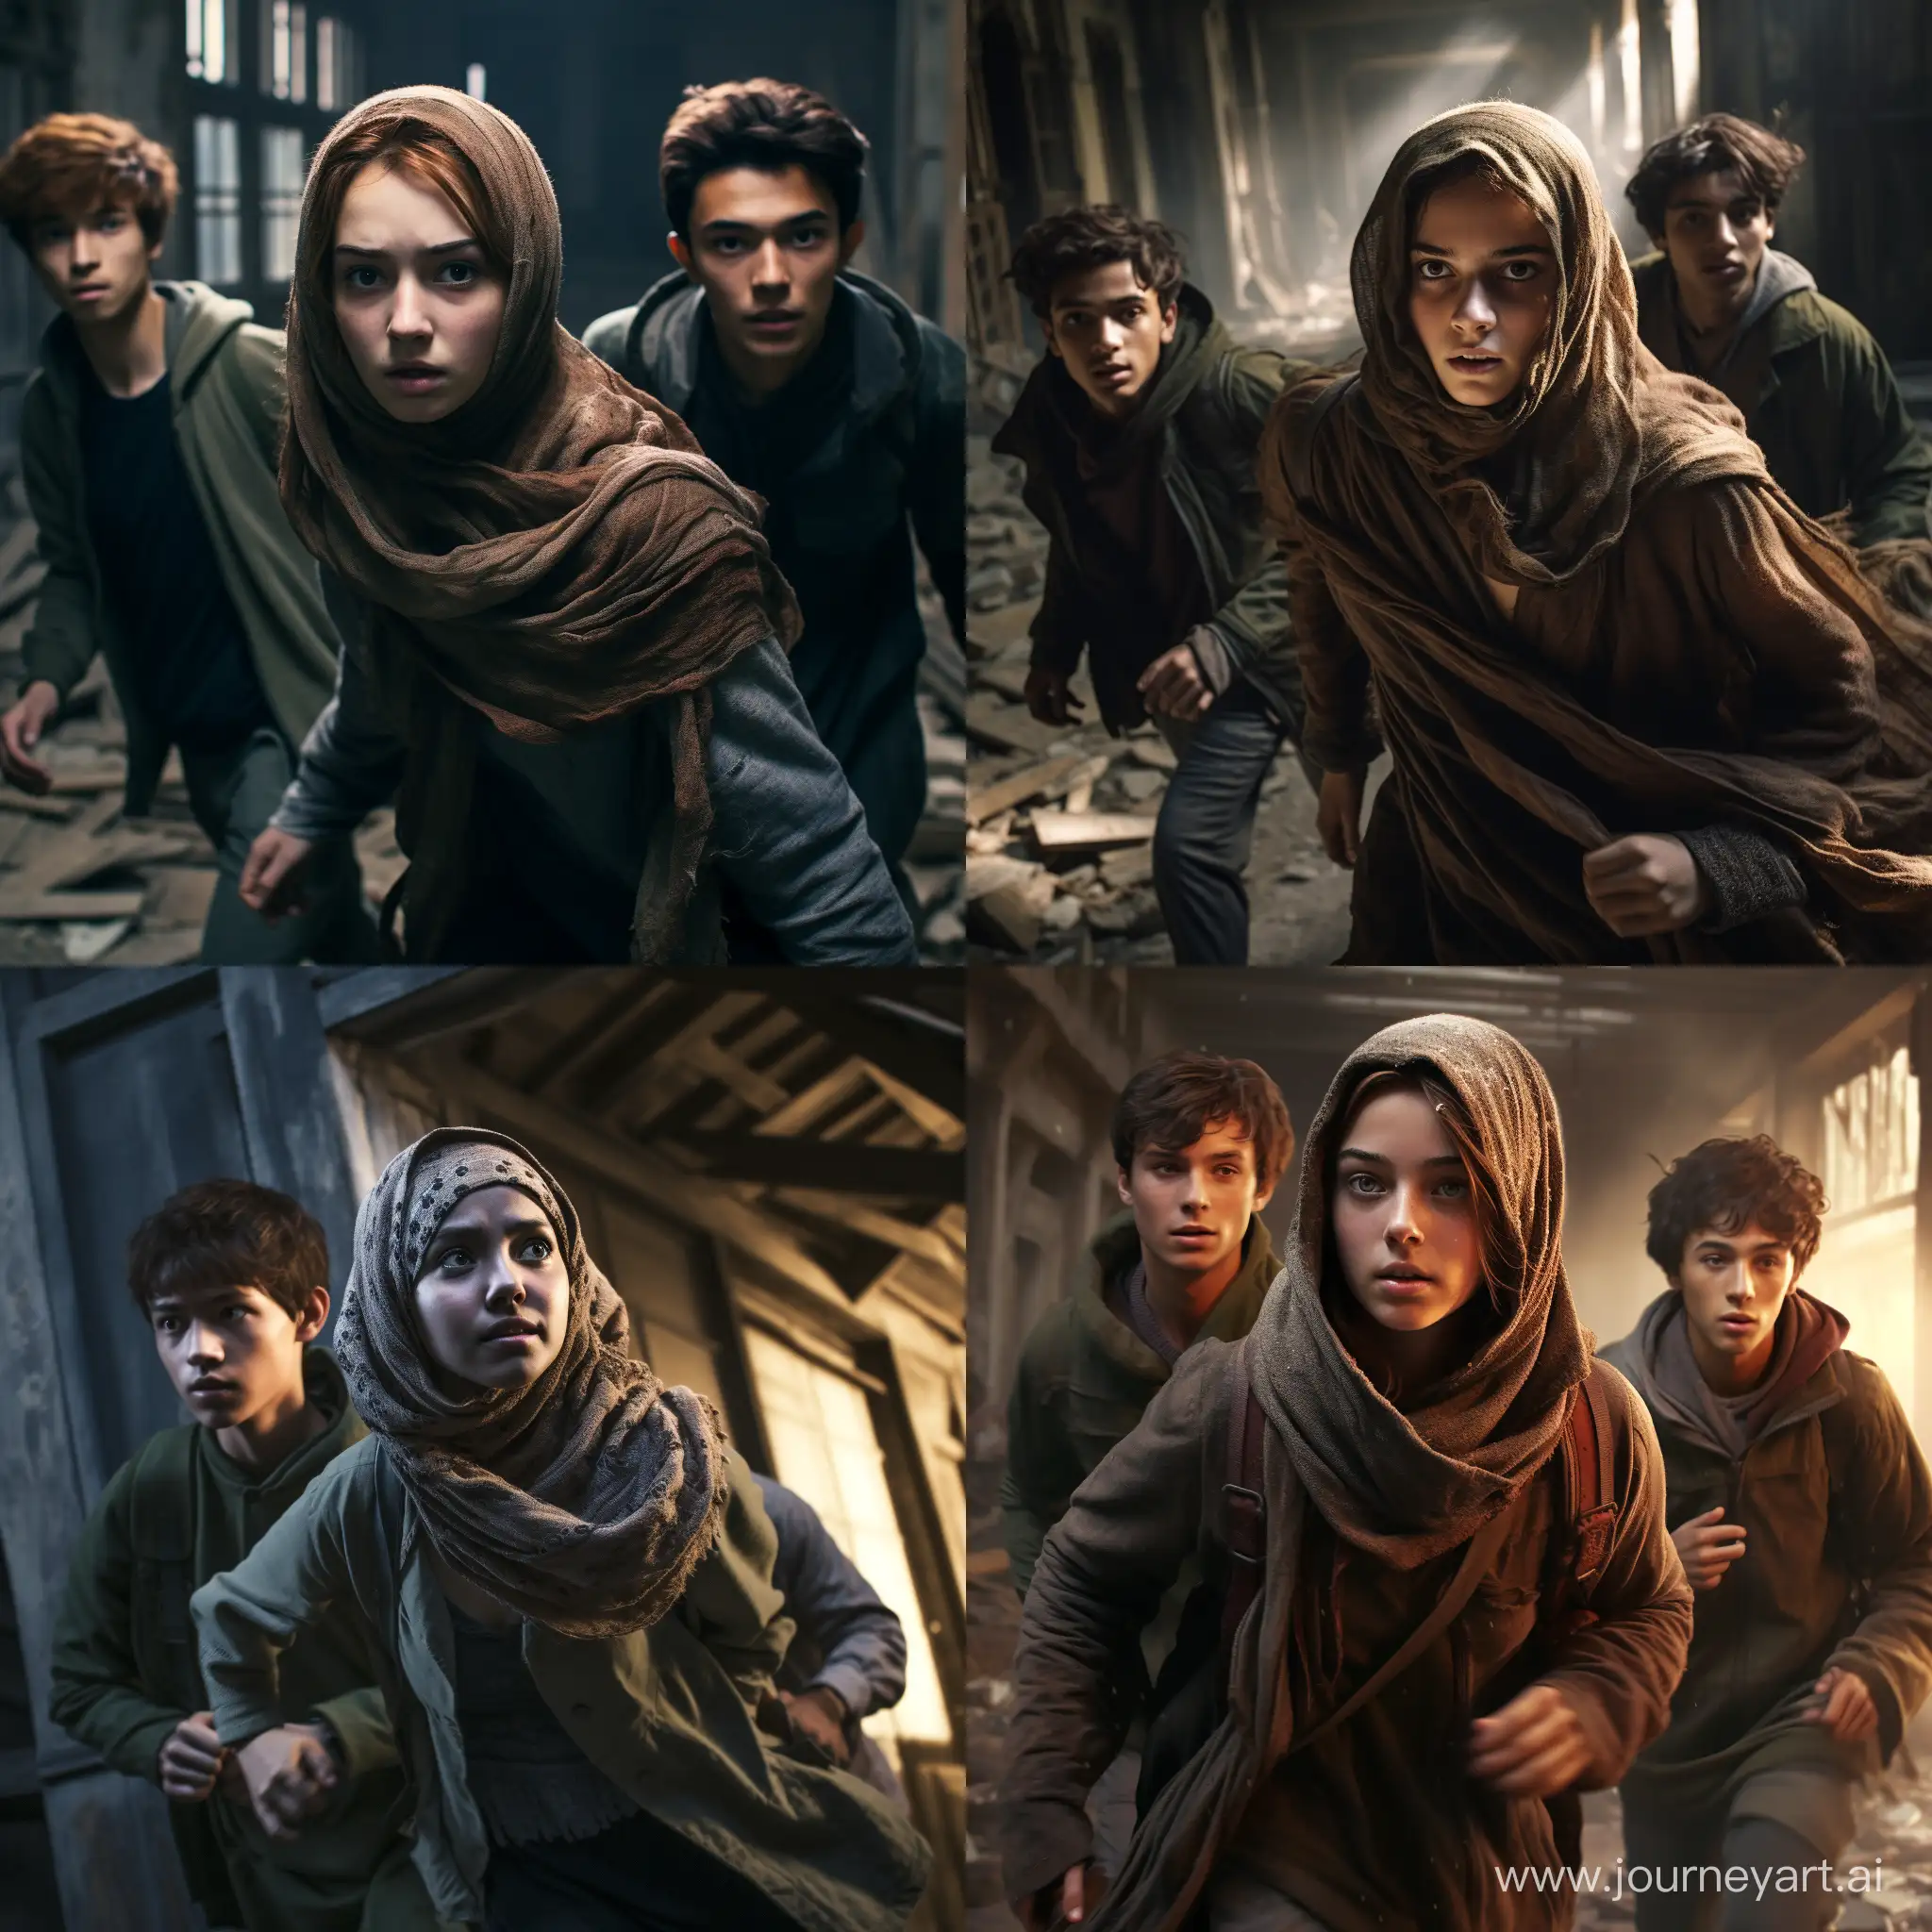 Fearful-Escape-Teenagers-in-Hijab-Fleeing-Zombie-Horde-in-Abandoned-Building